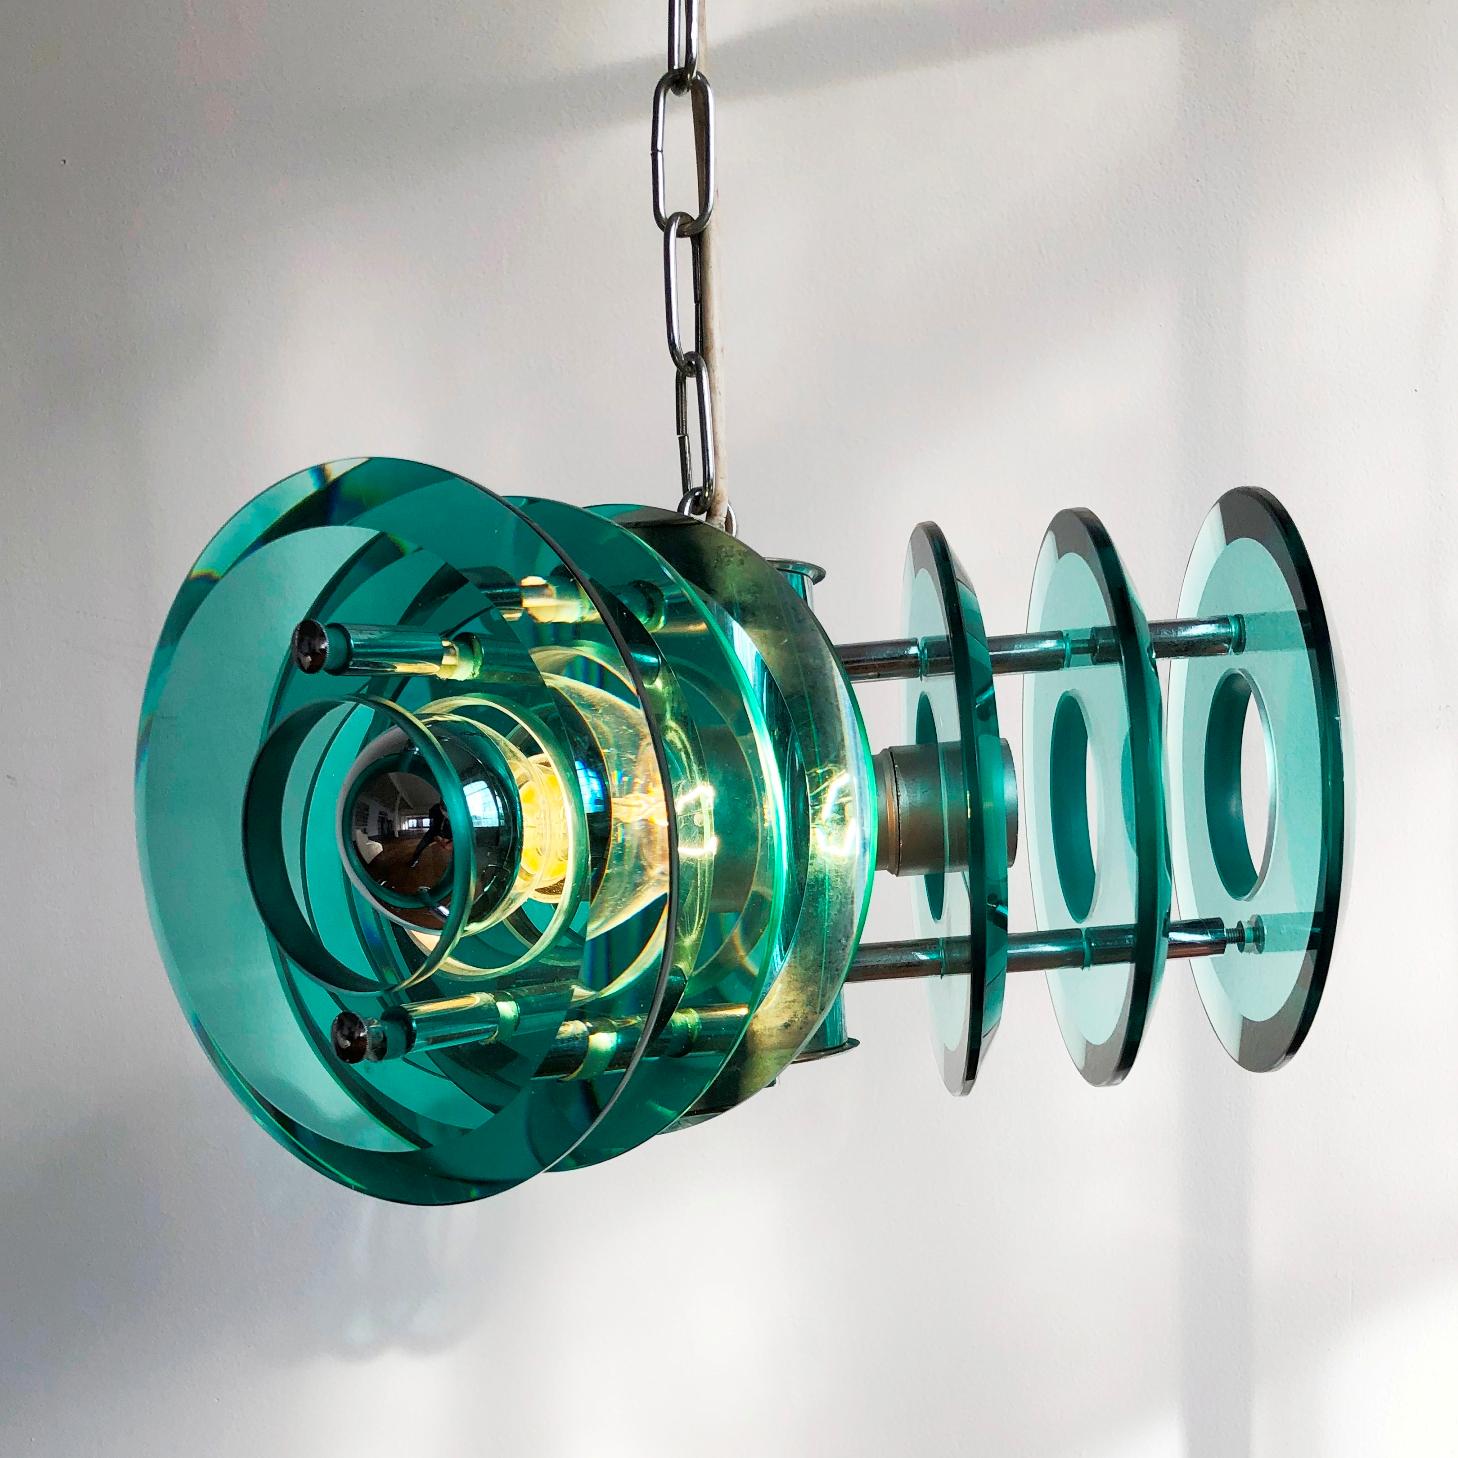 Plated Vintage Fontana Arte Style Light Pendant, Italy, 1970s For Sale